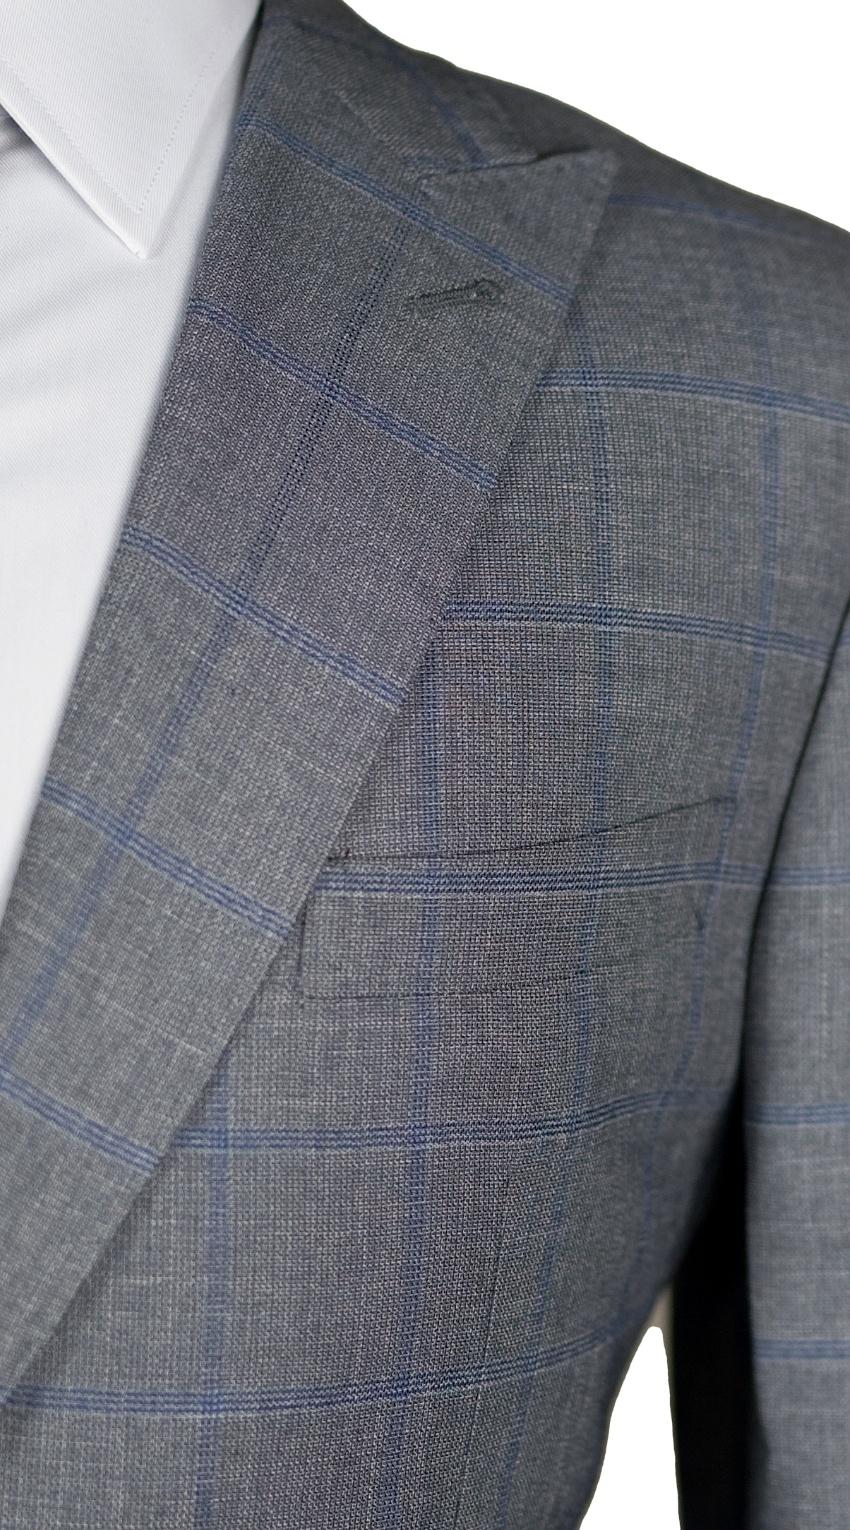 Gray with Blue Windowpane Suit